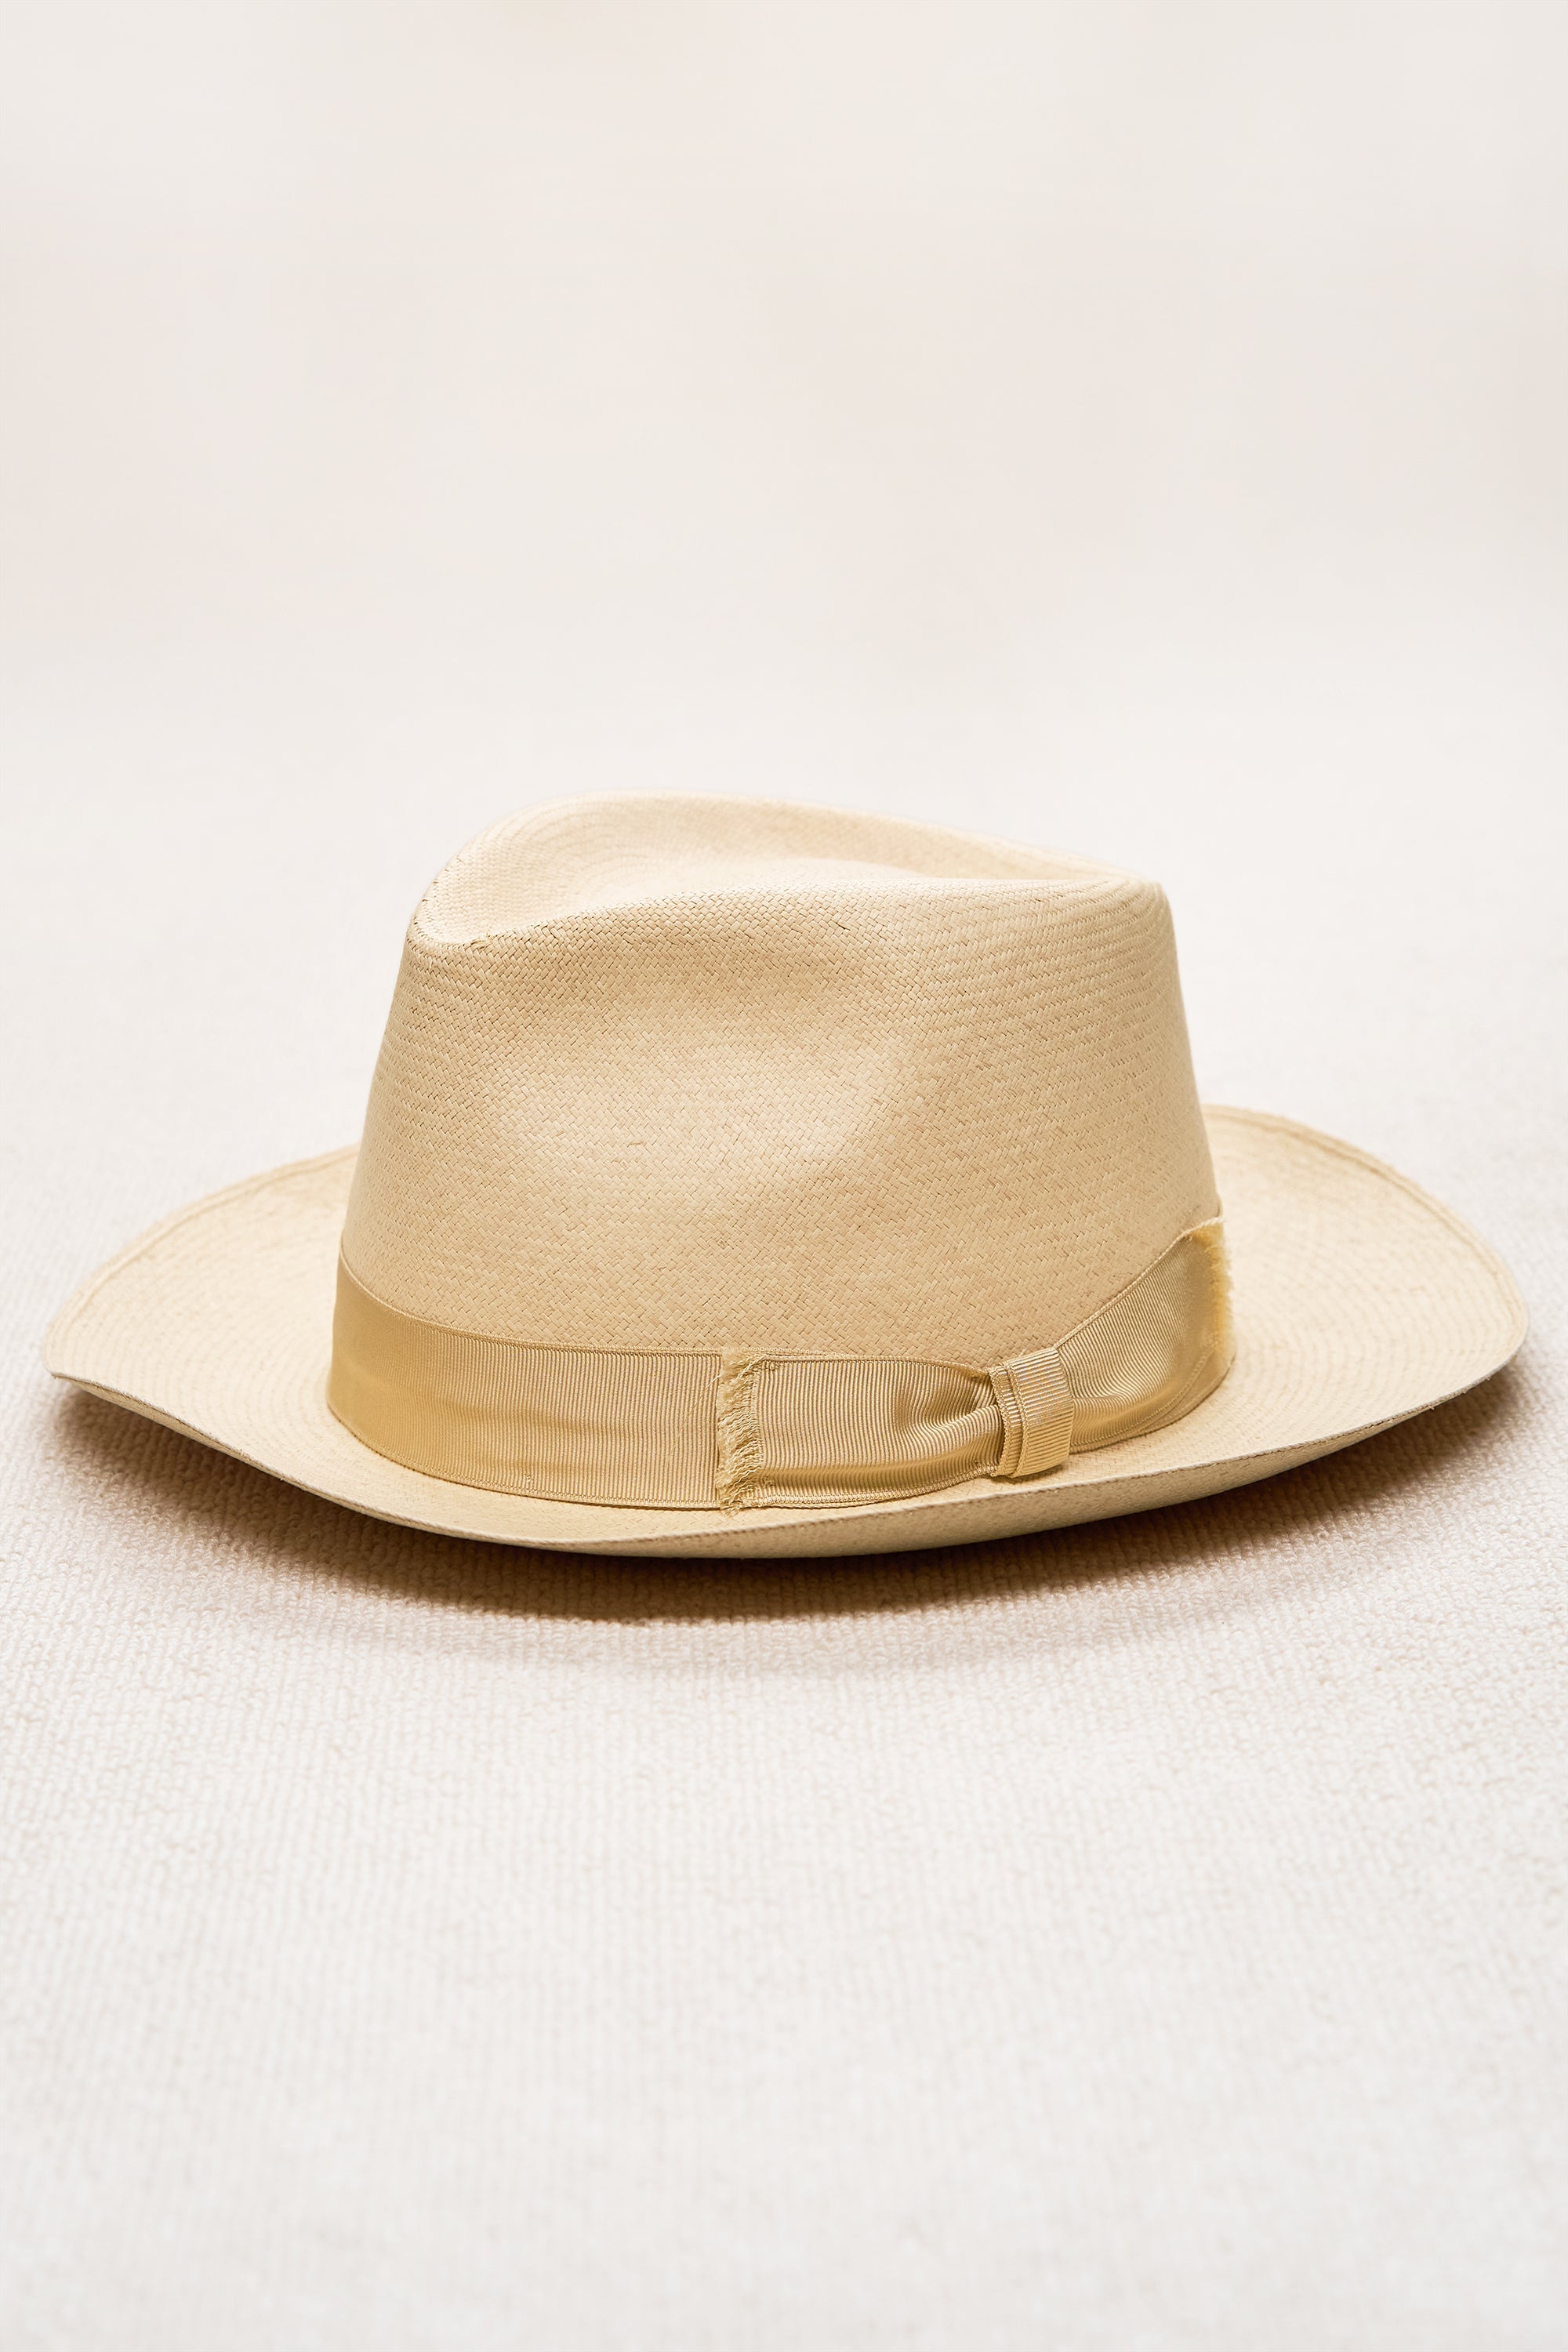 The Armoury Montecristi Panama Hat Old Hood *new with defect*